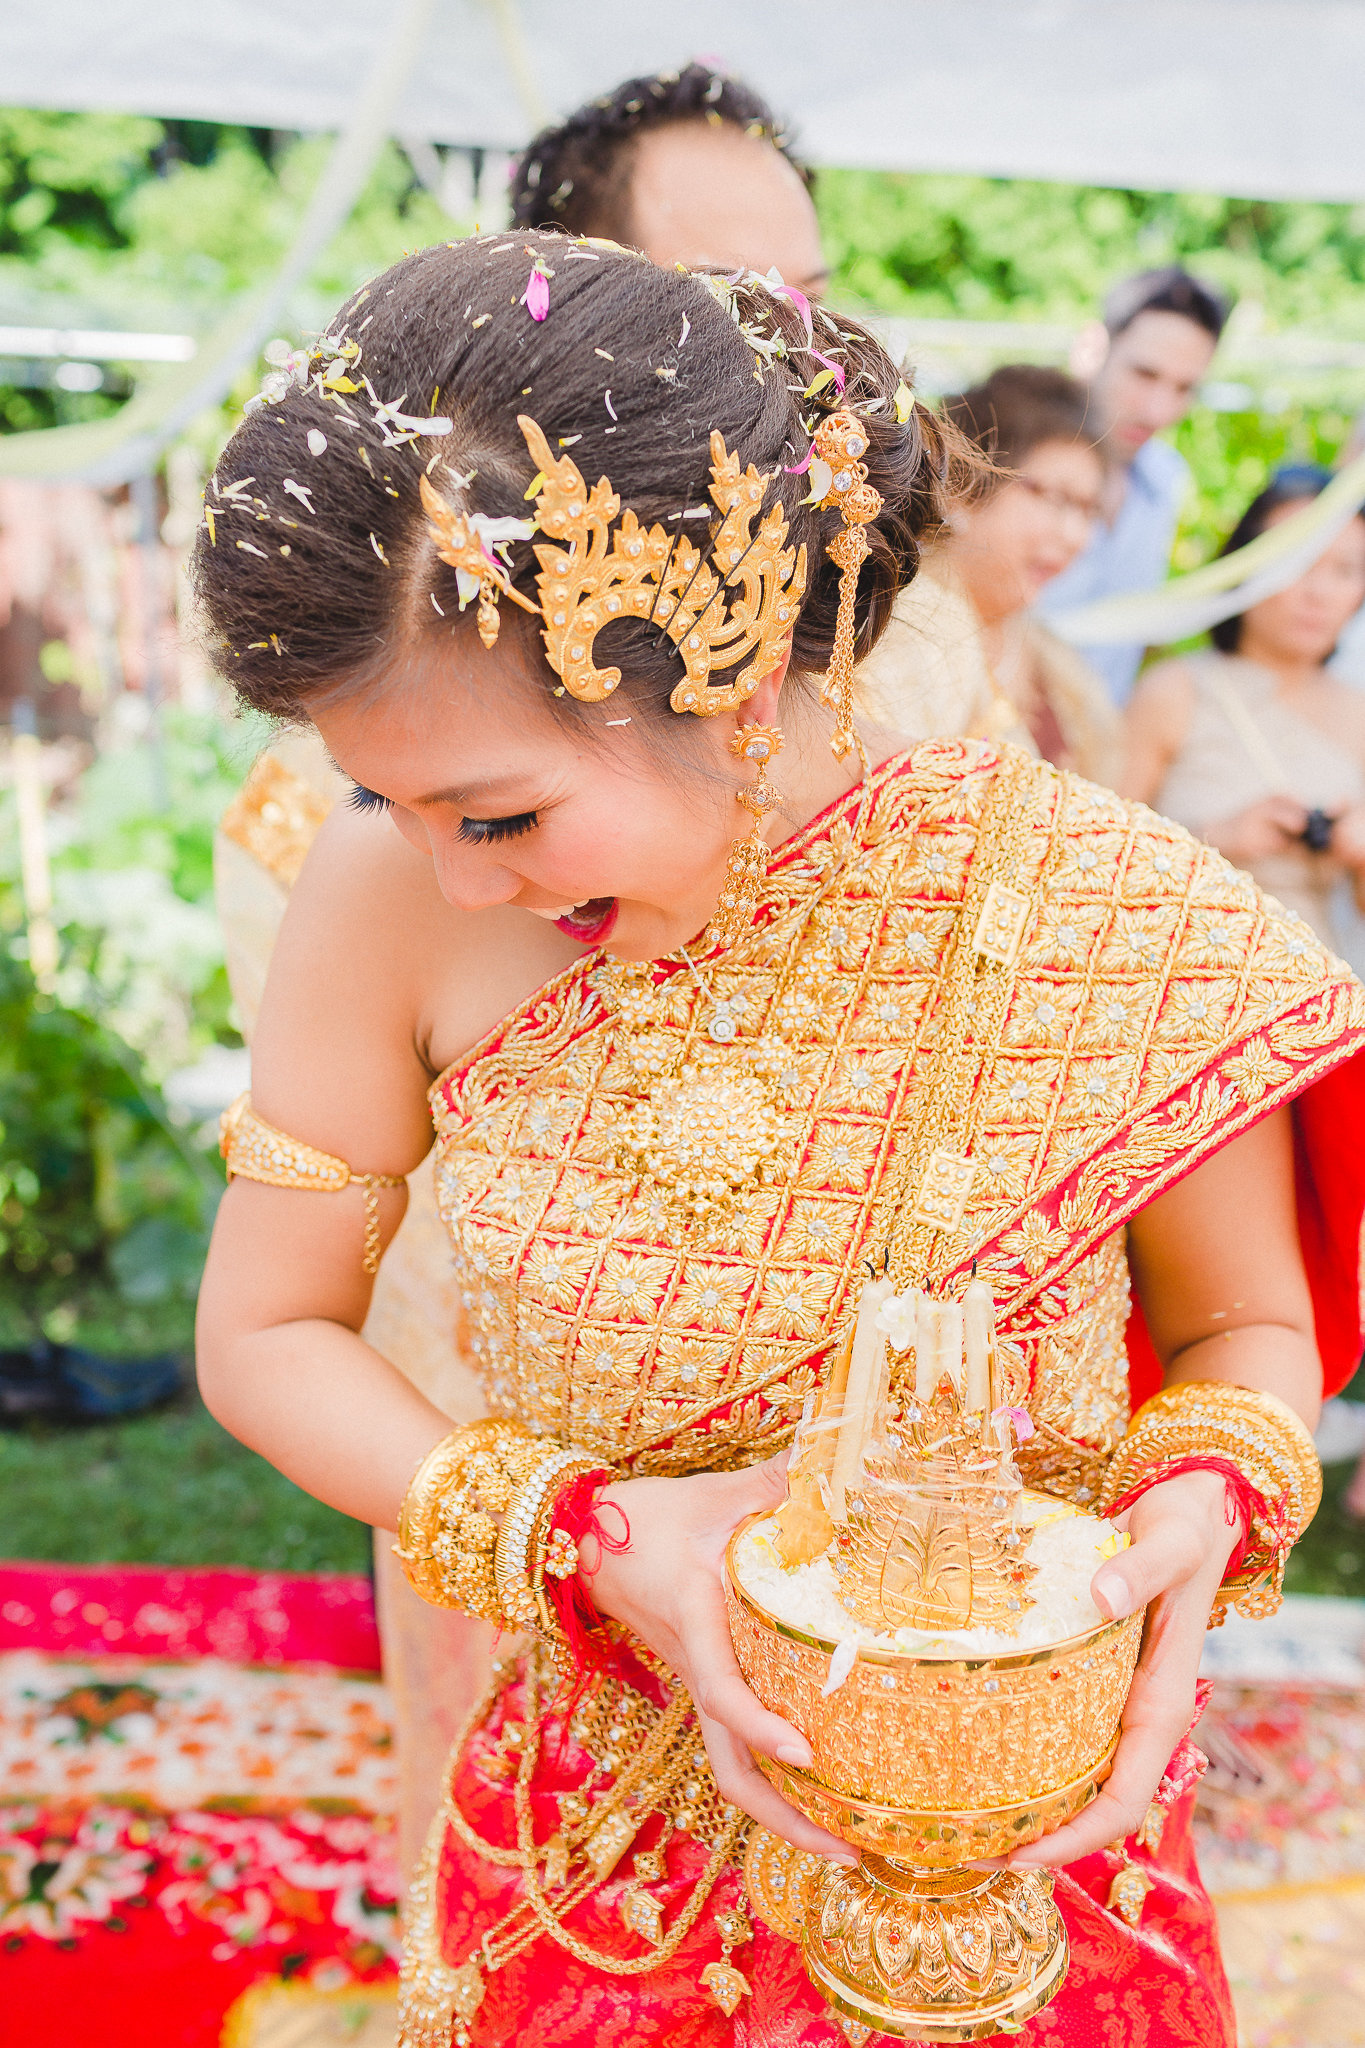 photographe-montreal-mariage-culturel-traditionnel-cambodgien-lisa-renault-photographie-traditional-cultural-cambodian-wedding-75